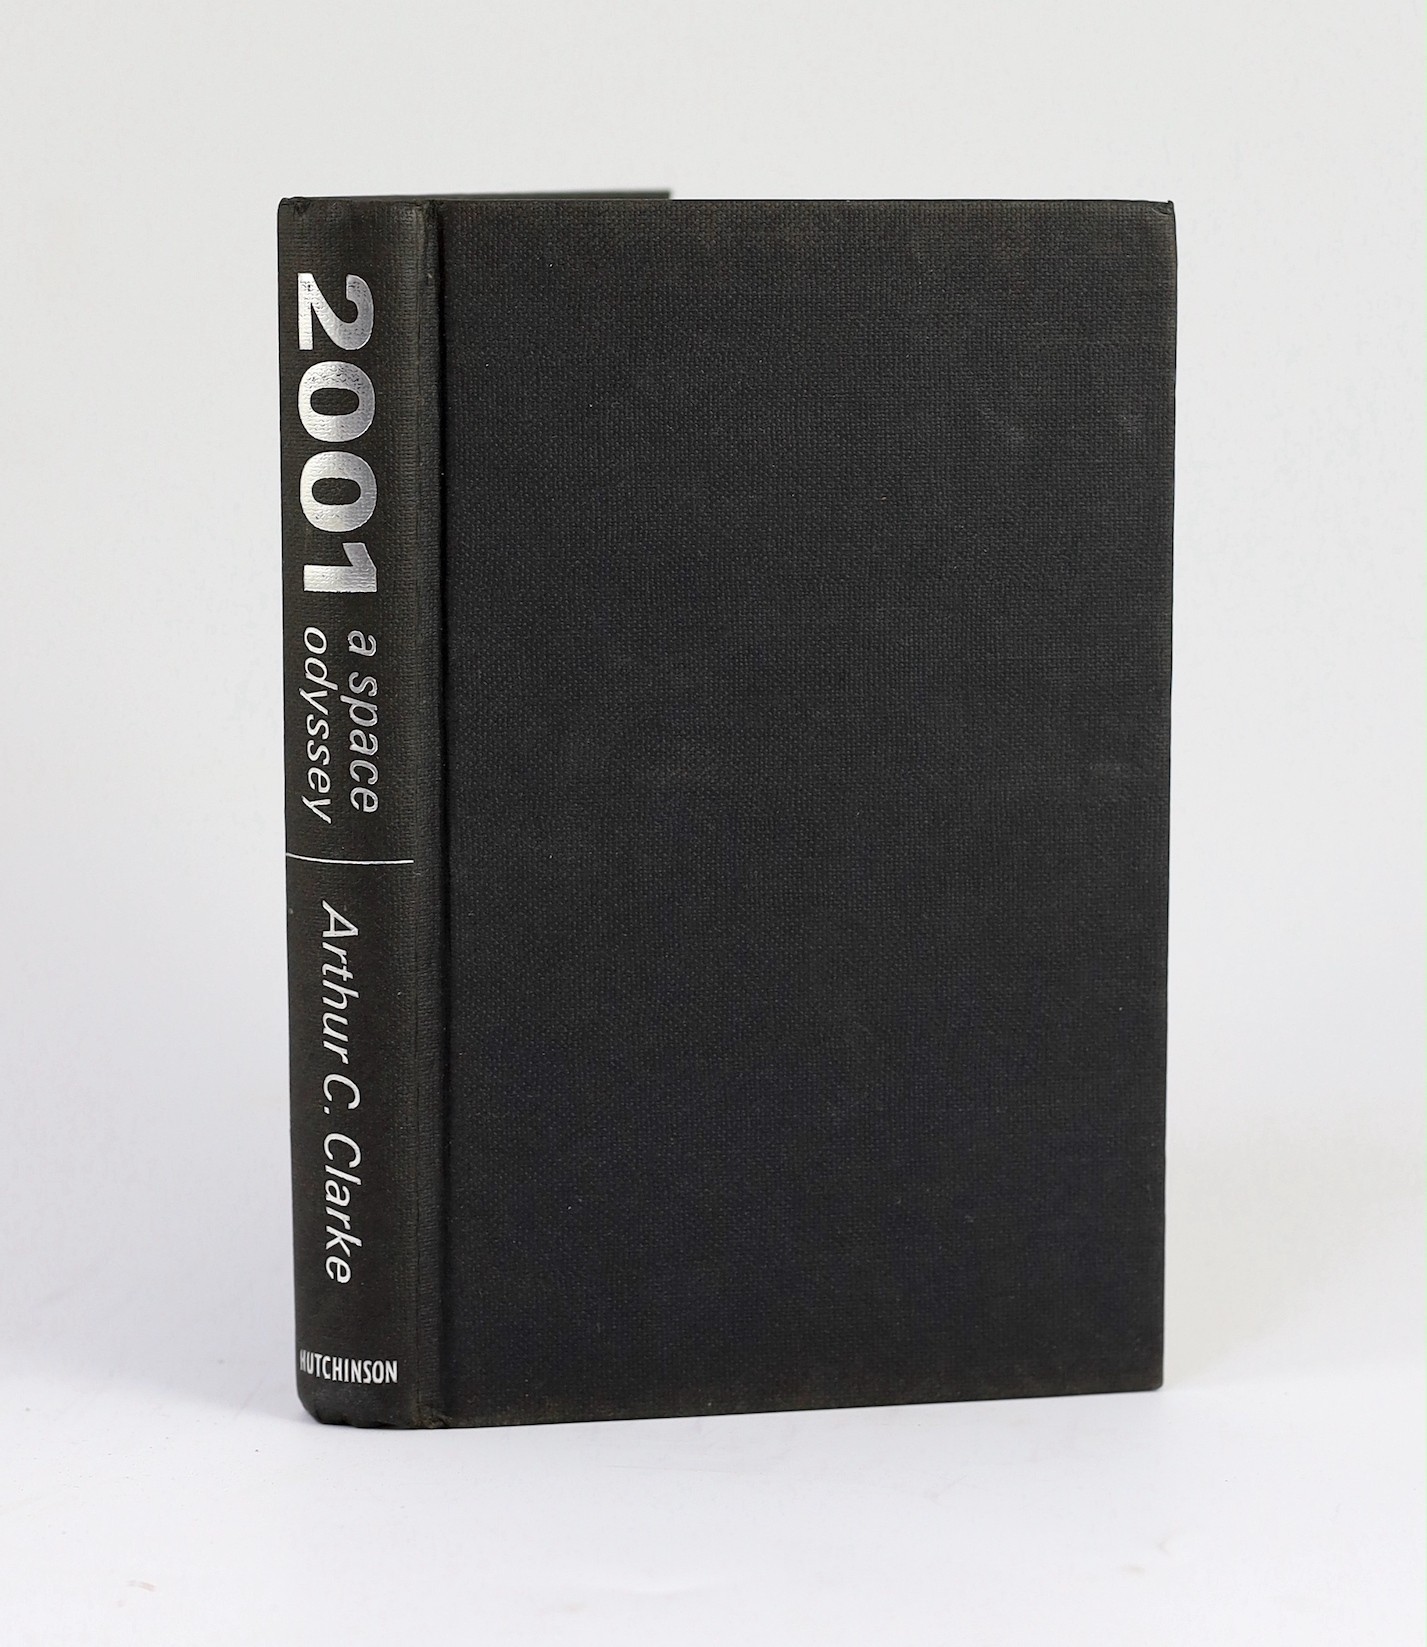 ° ° Clarke, Arthur - 2001 A Space Odyssey, 8vo, original black cloth with silver lettering to spine, - Image 3 of 3